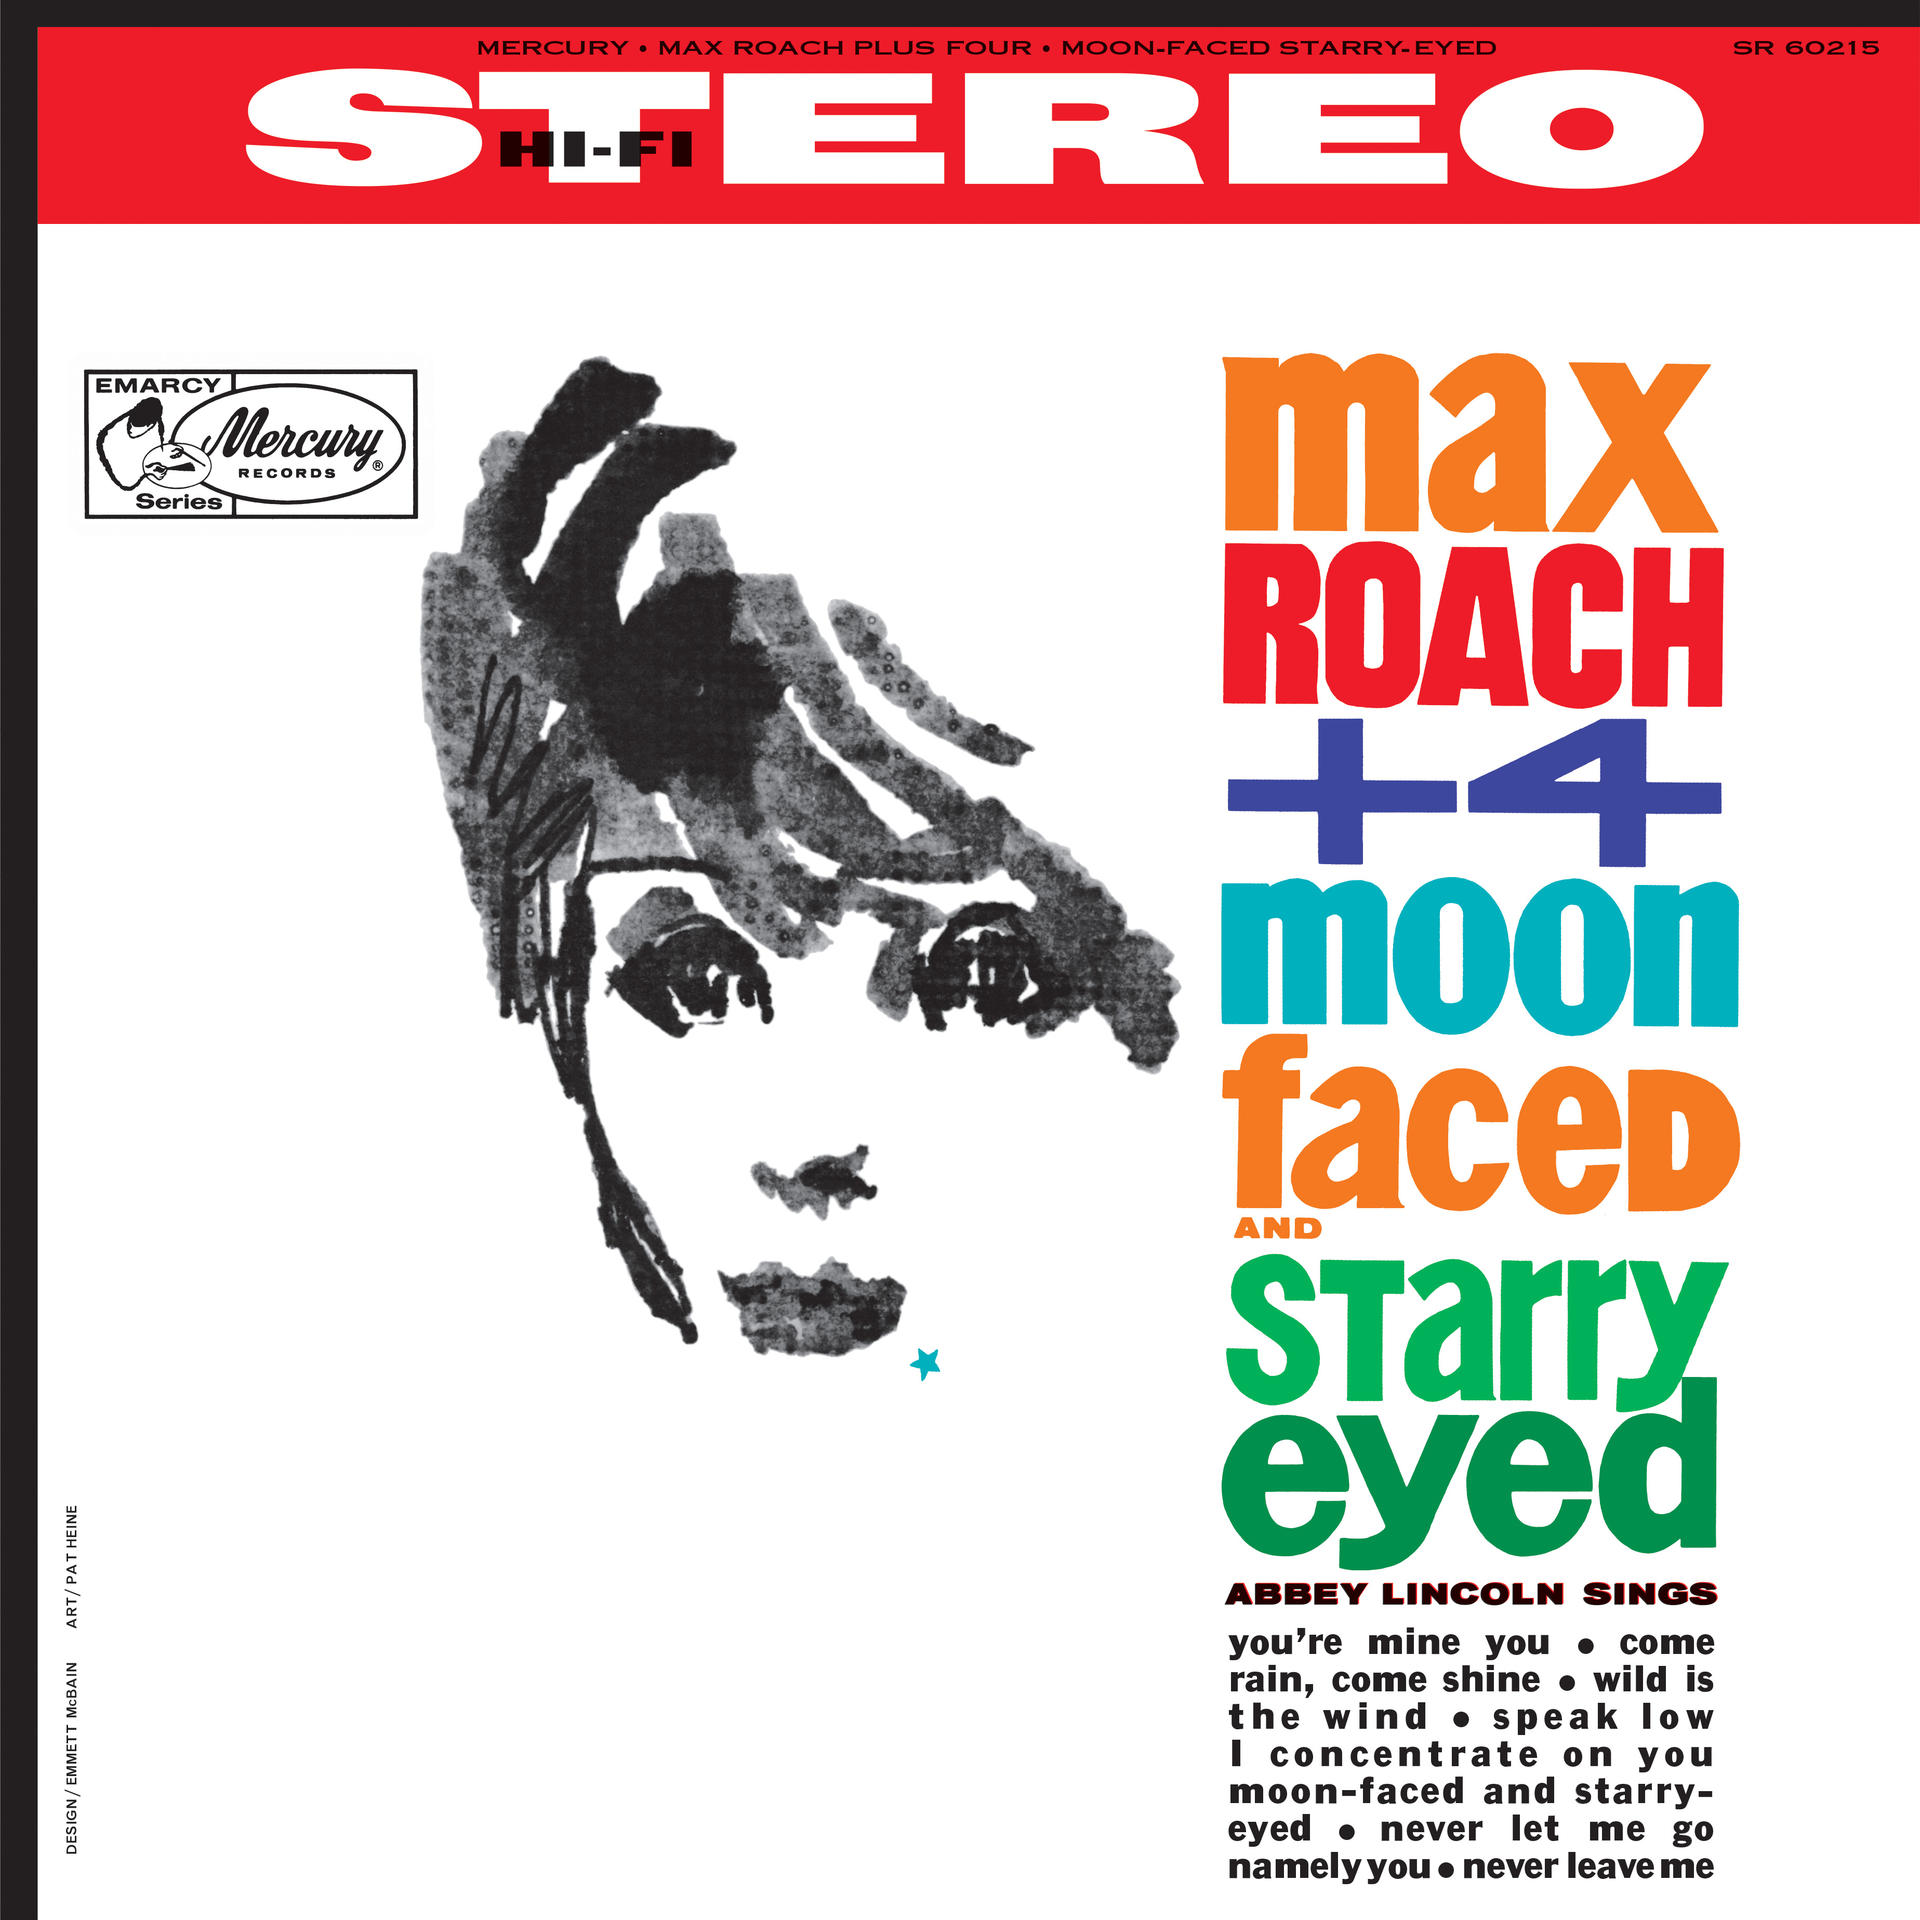 Max Roach - Moon-Faced and Request) - by (Verve Starry-Eyed (Vinyl)